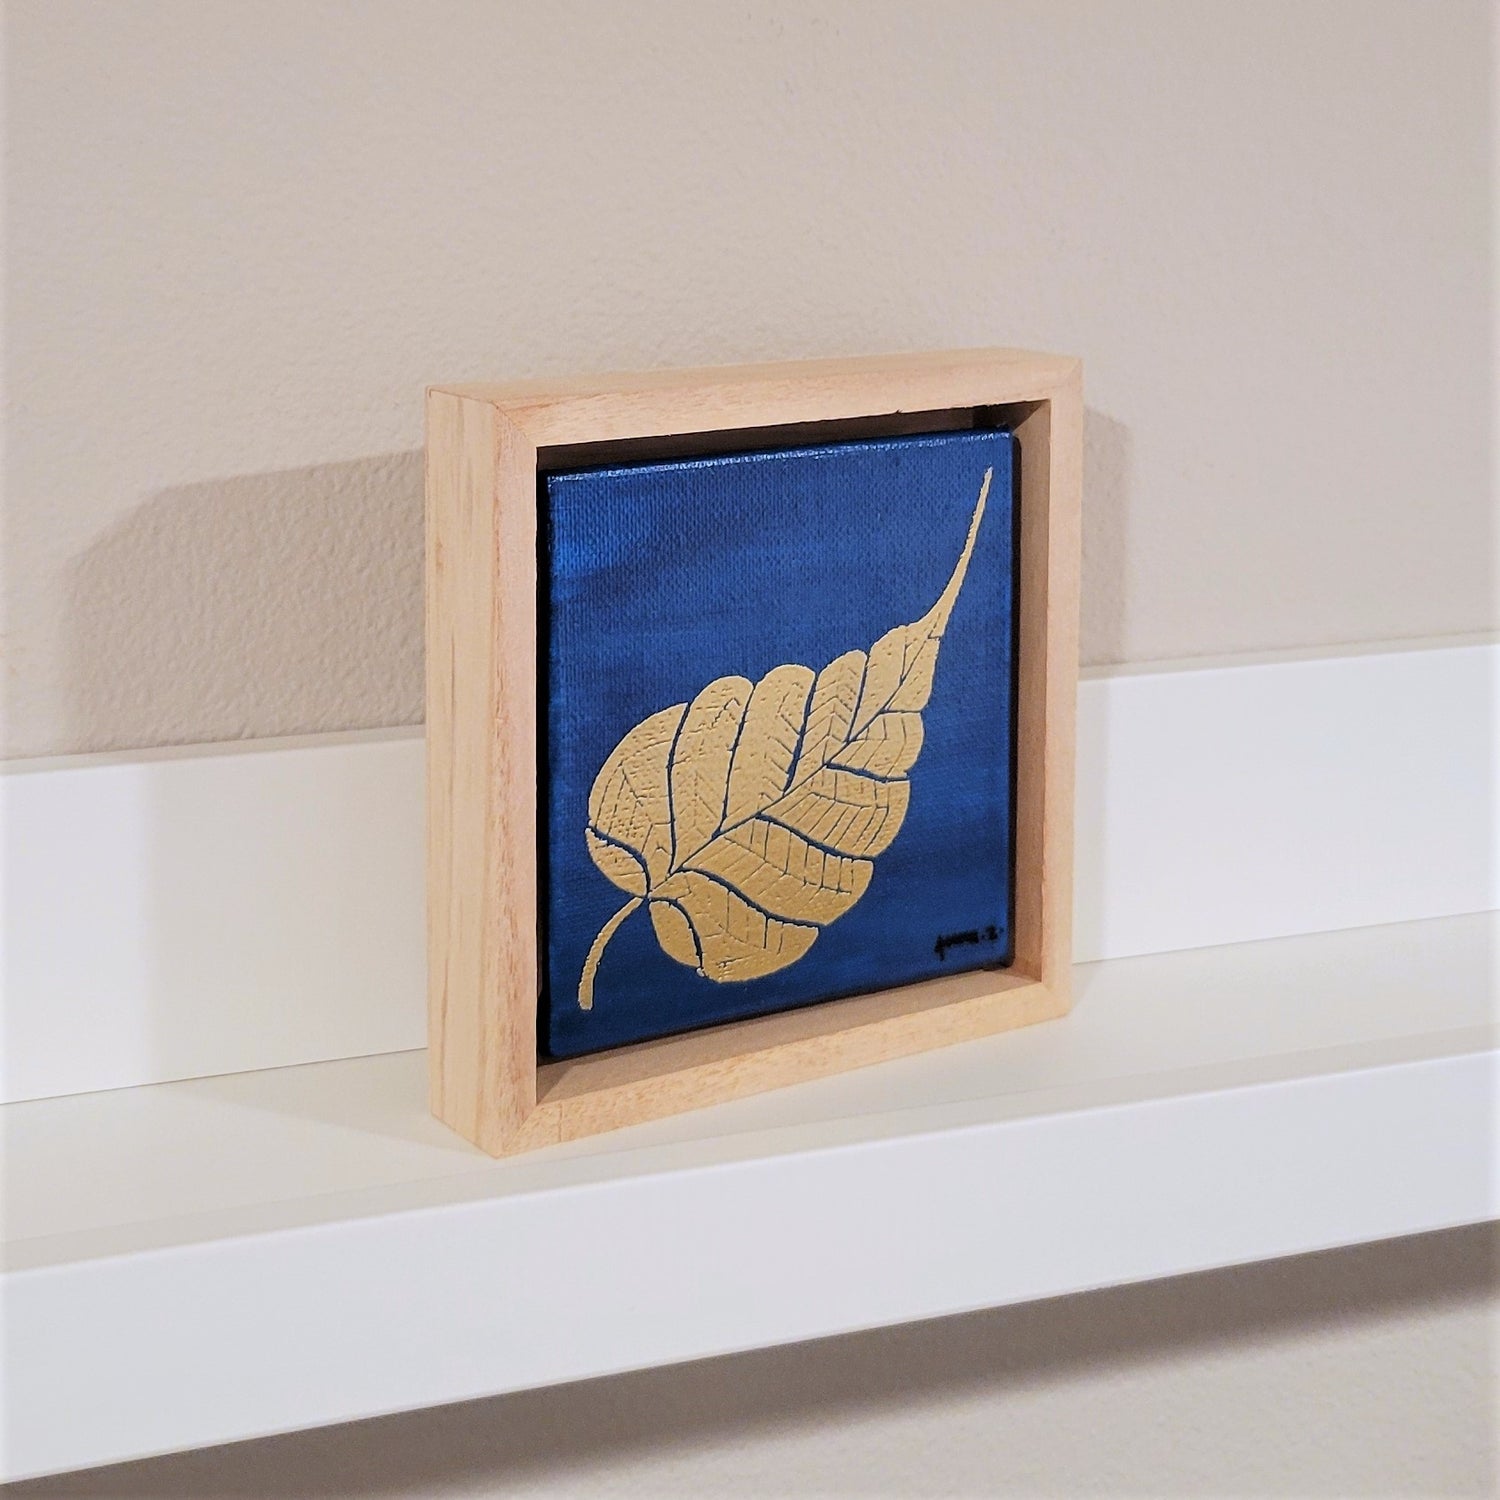 Golden banyan leaf set against a bright blue background on a framed mini-sized canvas panel. Metallic gold colored heat embossing from original carved block design over an acrylic painted background.  Mounted in floater frame style within a 5" x 5" rustic wooden box frame with mini sawtooth hanger on reverse. The golden leaf is perfectly complemented by the light colored wooden frame. 